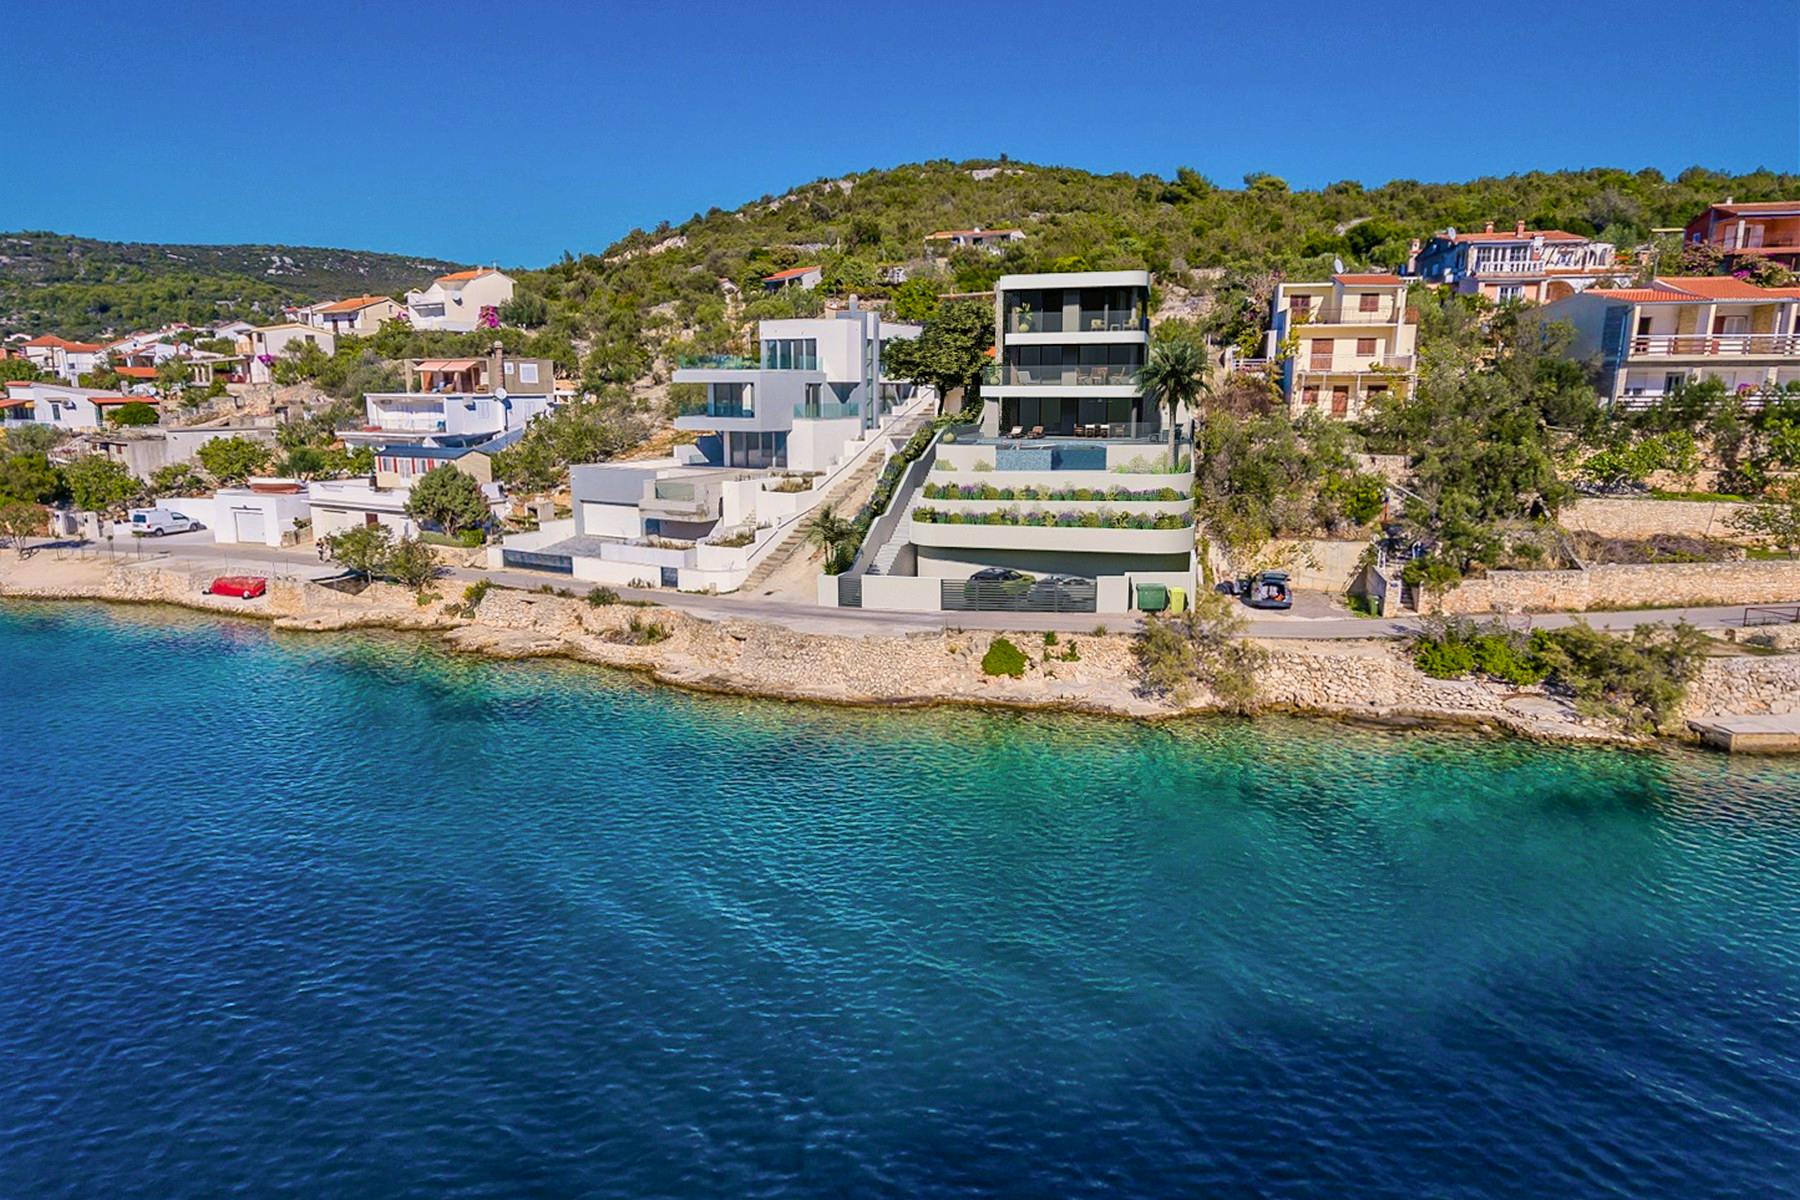 Superb seafront villa with swimming pool near Trogir